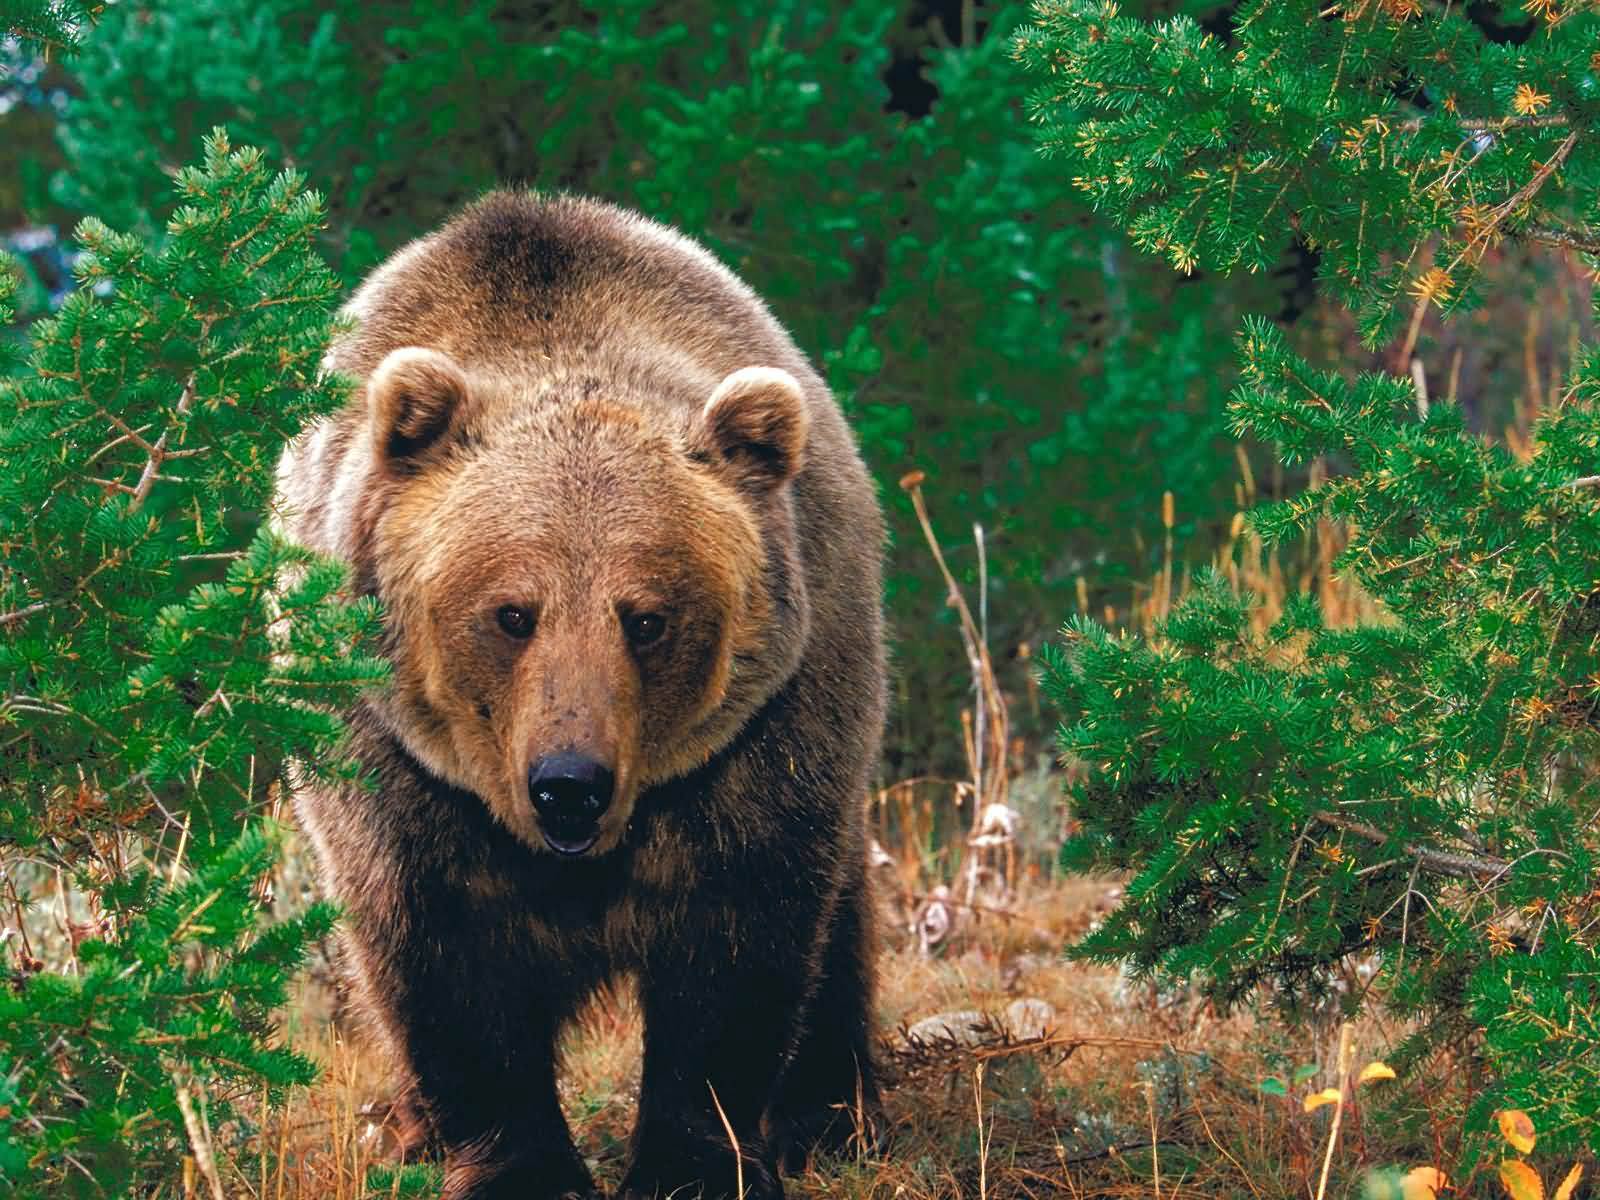 Picture Of Grizzly Bears 5830 1600x1200 px